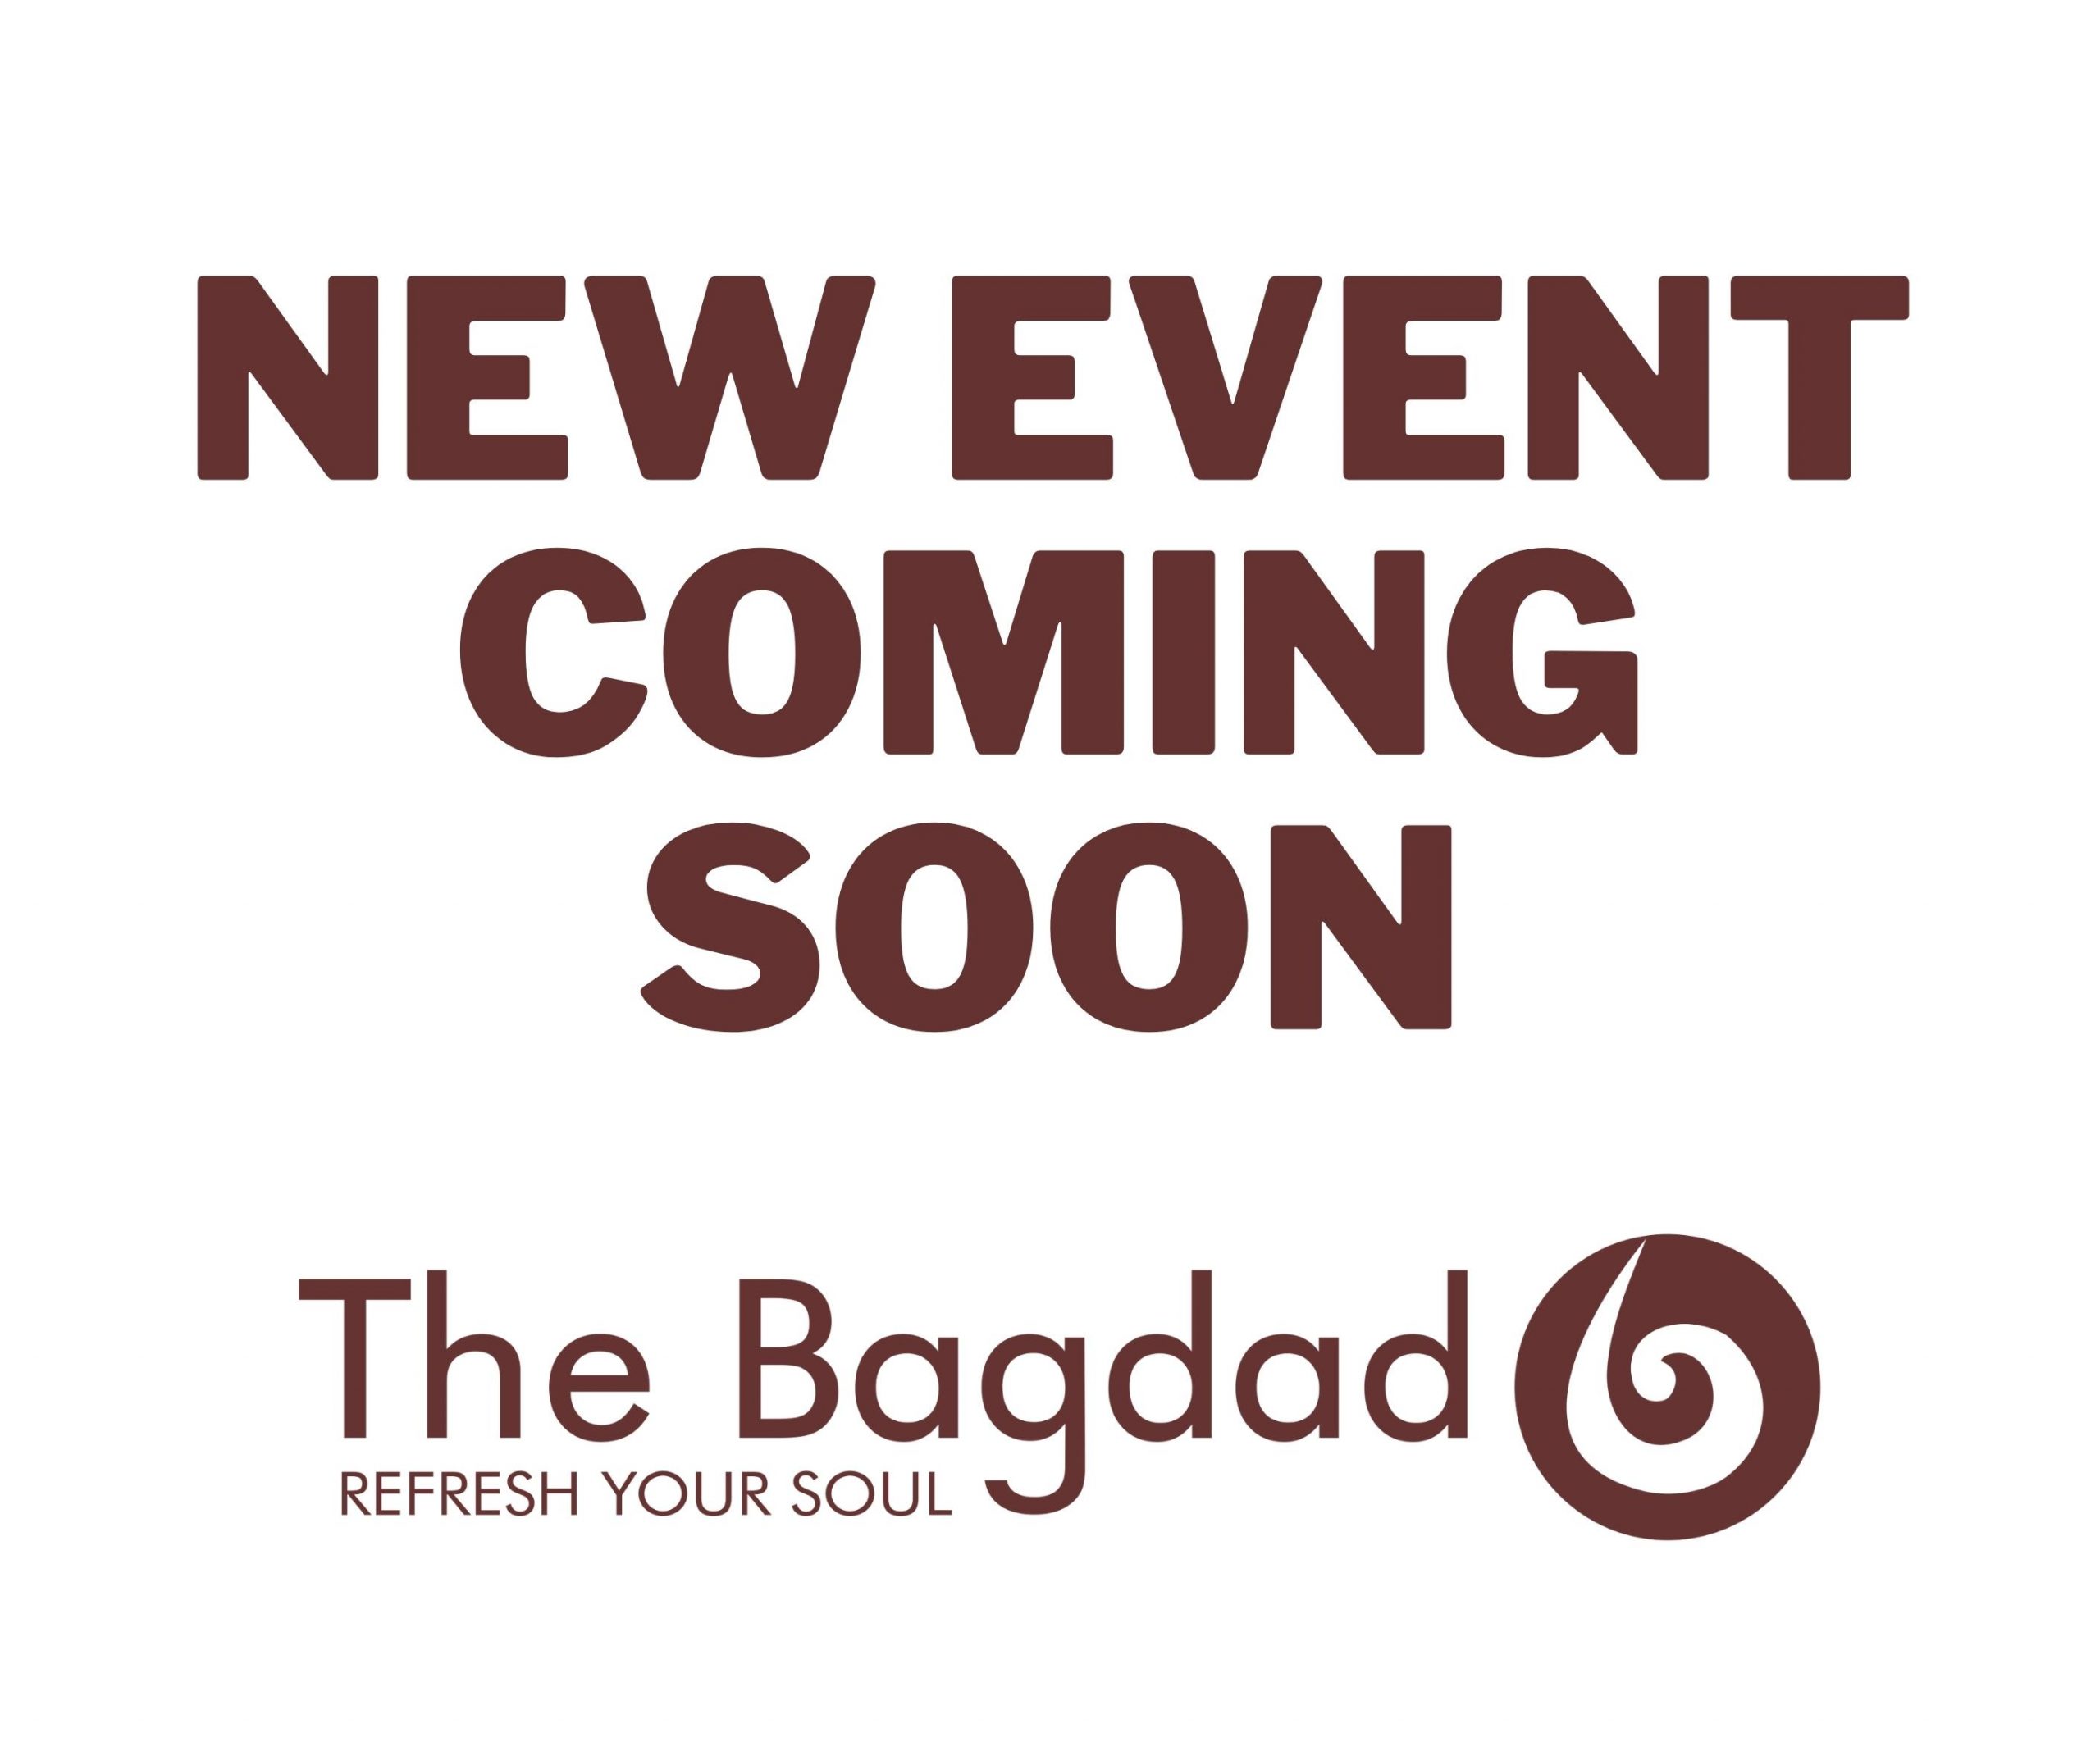 New Event Coming Soon - The Bagdad